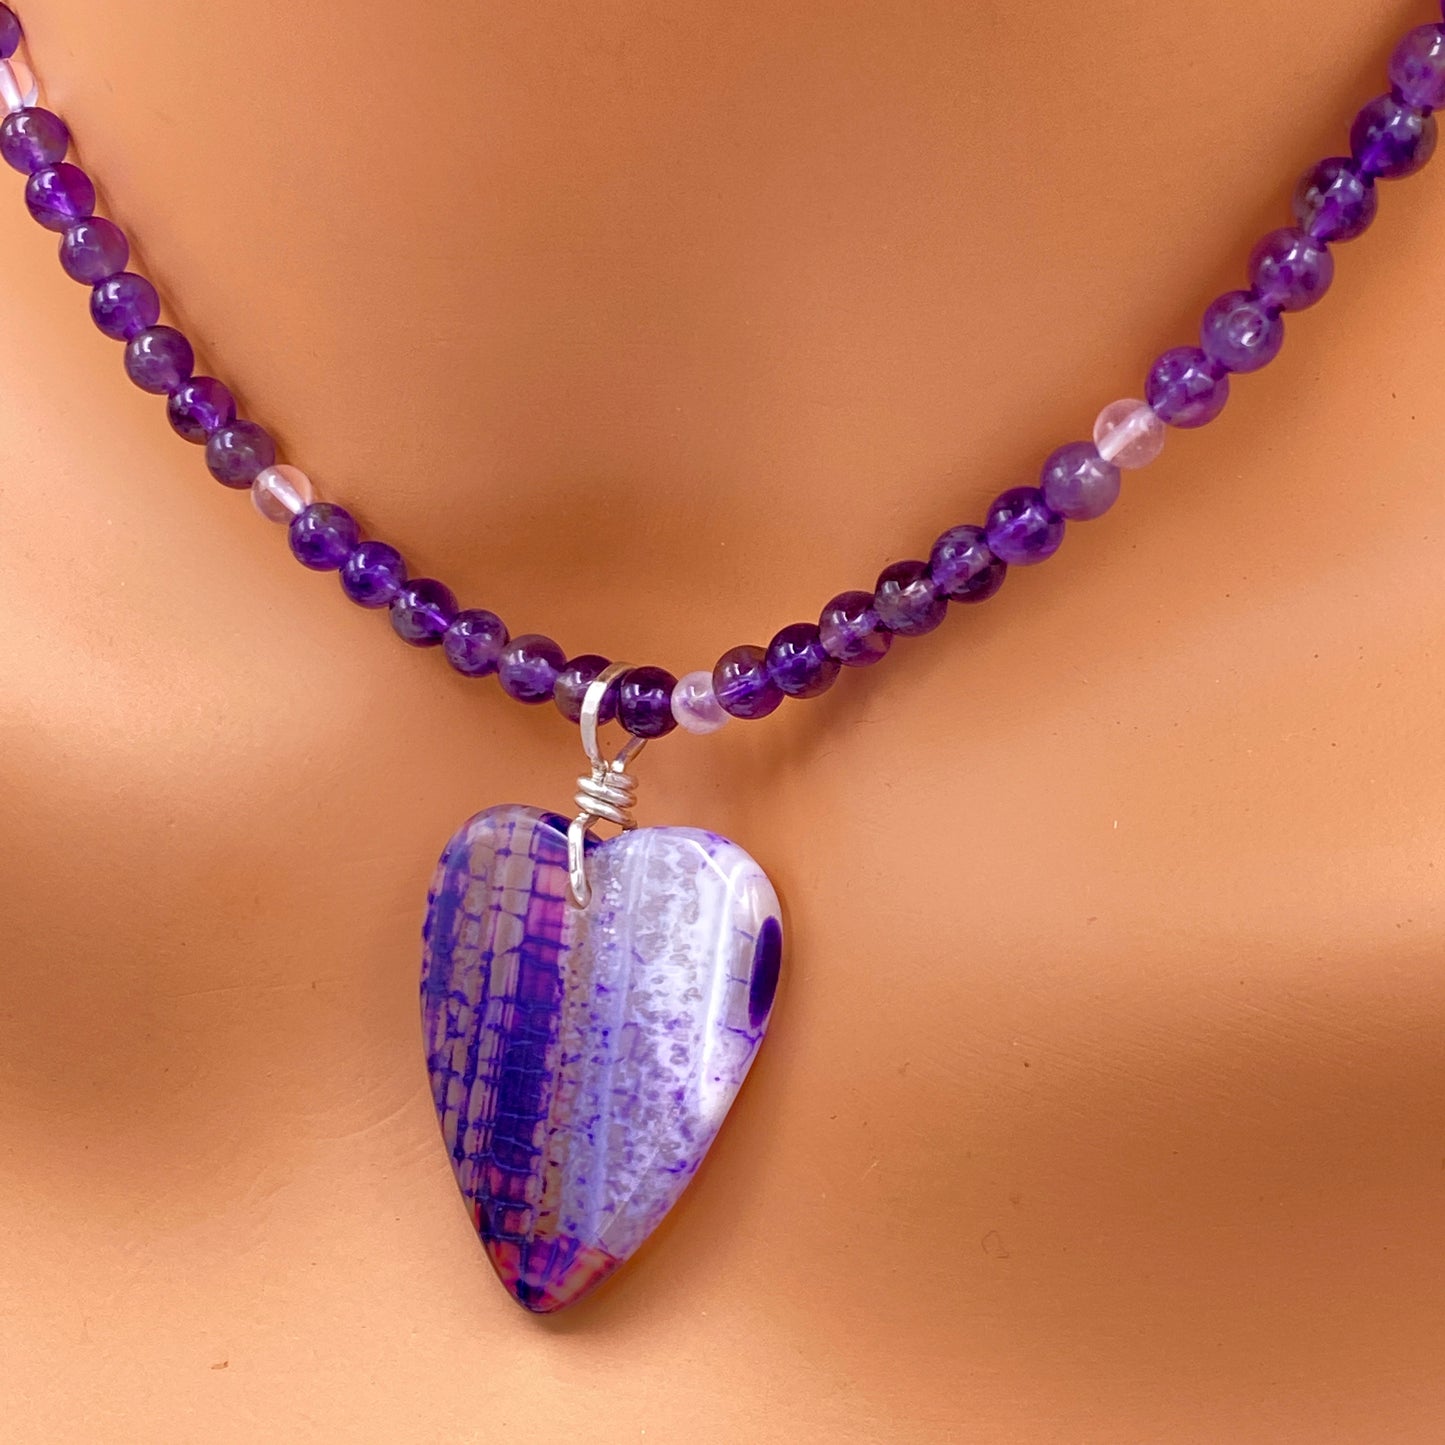 Dragon’s Vein Agate Heart Pendant Choker/Necklace with Dark and Lavender Amethyst Gemstone Necklace